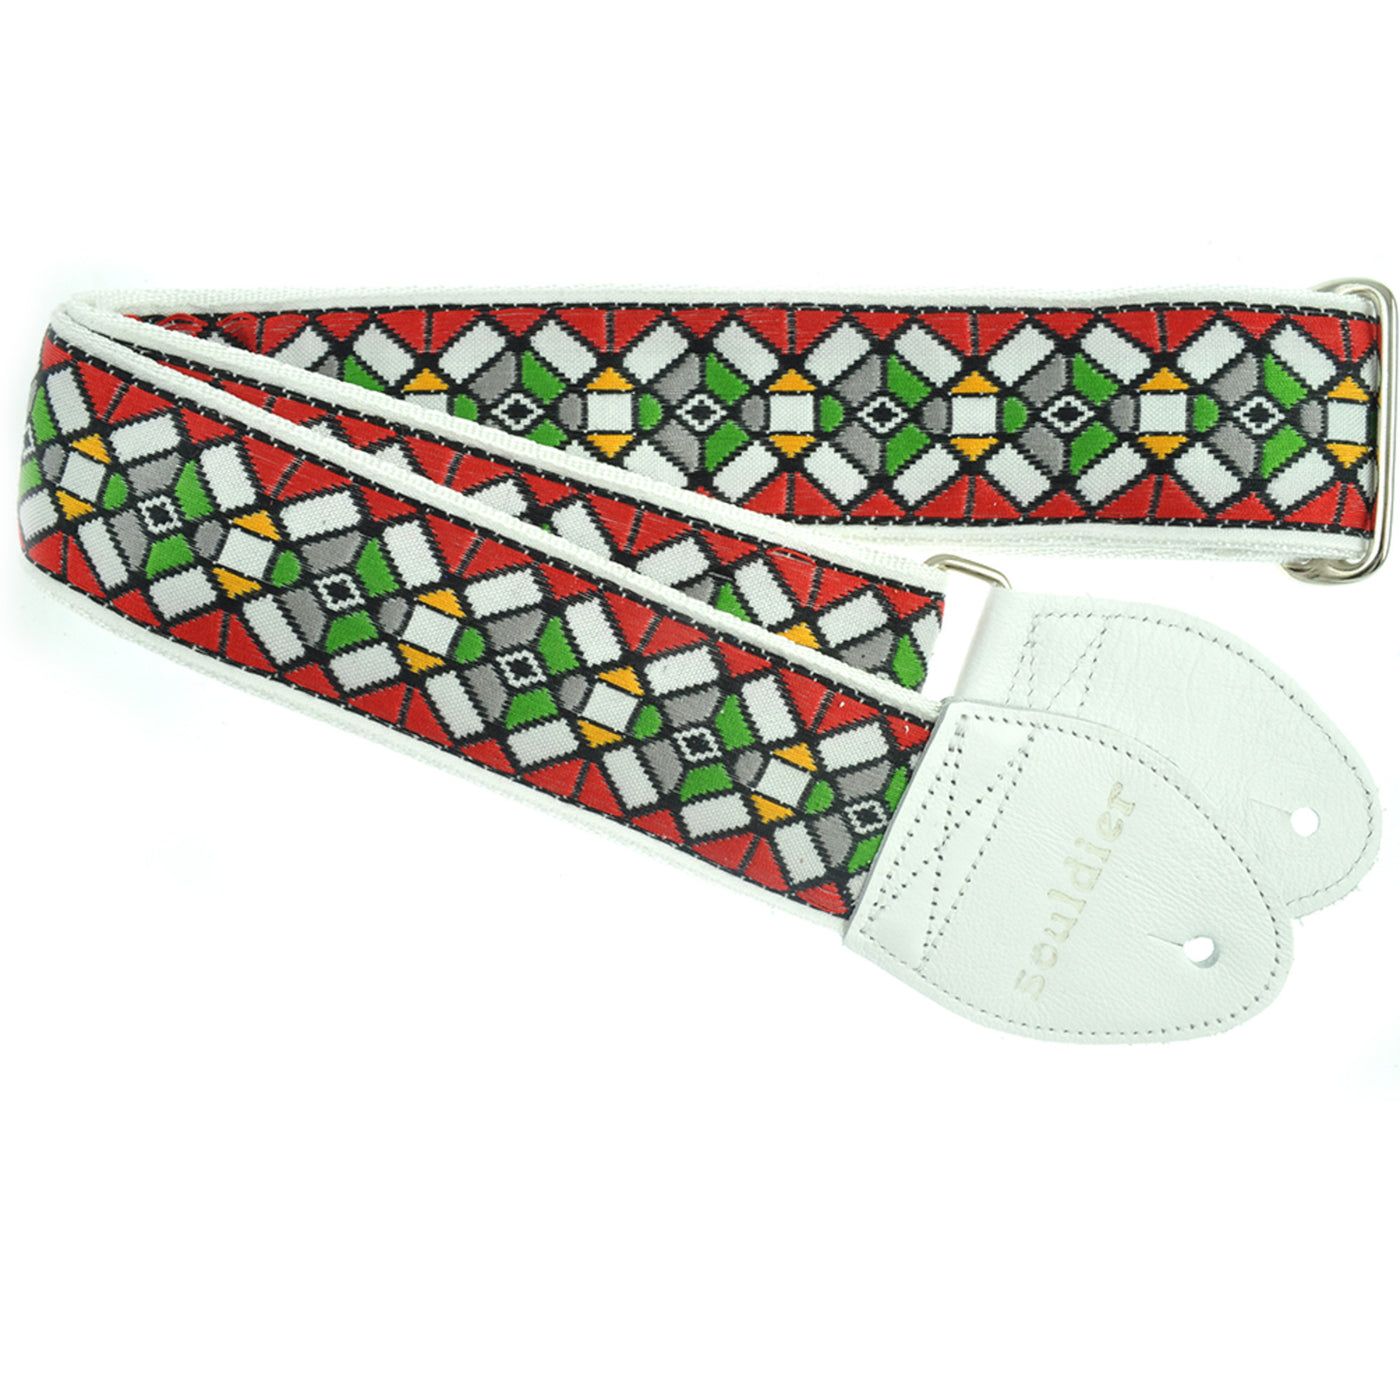 Souldier GS0178WH02WH - Handmade Seatbelt Guitar Strap for Bass, Electric or Acoustic Guitar, 2 Inches Wide and Adjustable Length from 30" to 63"  Made in the USA, Stained Glass, Red